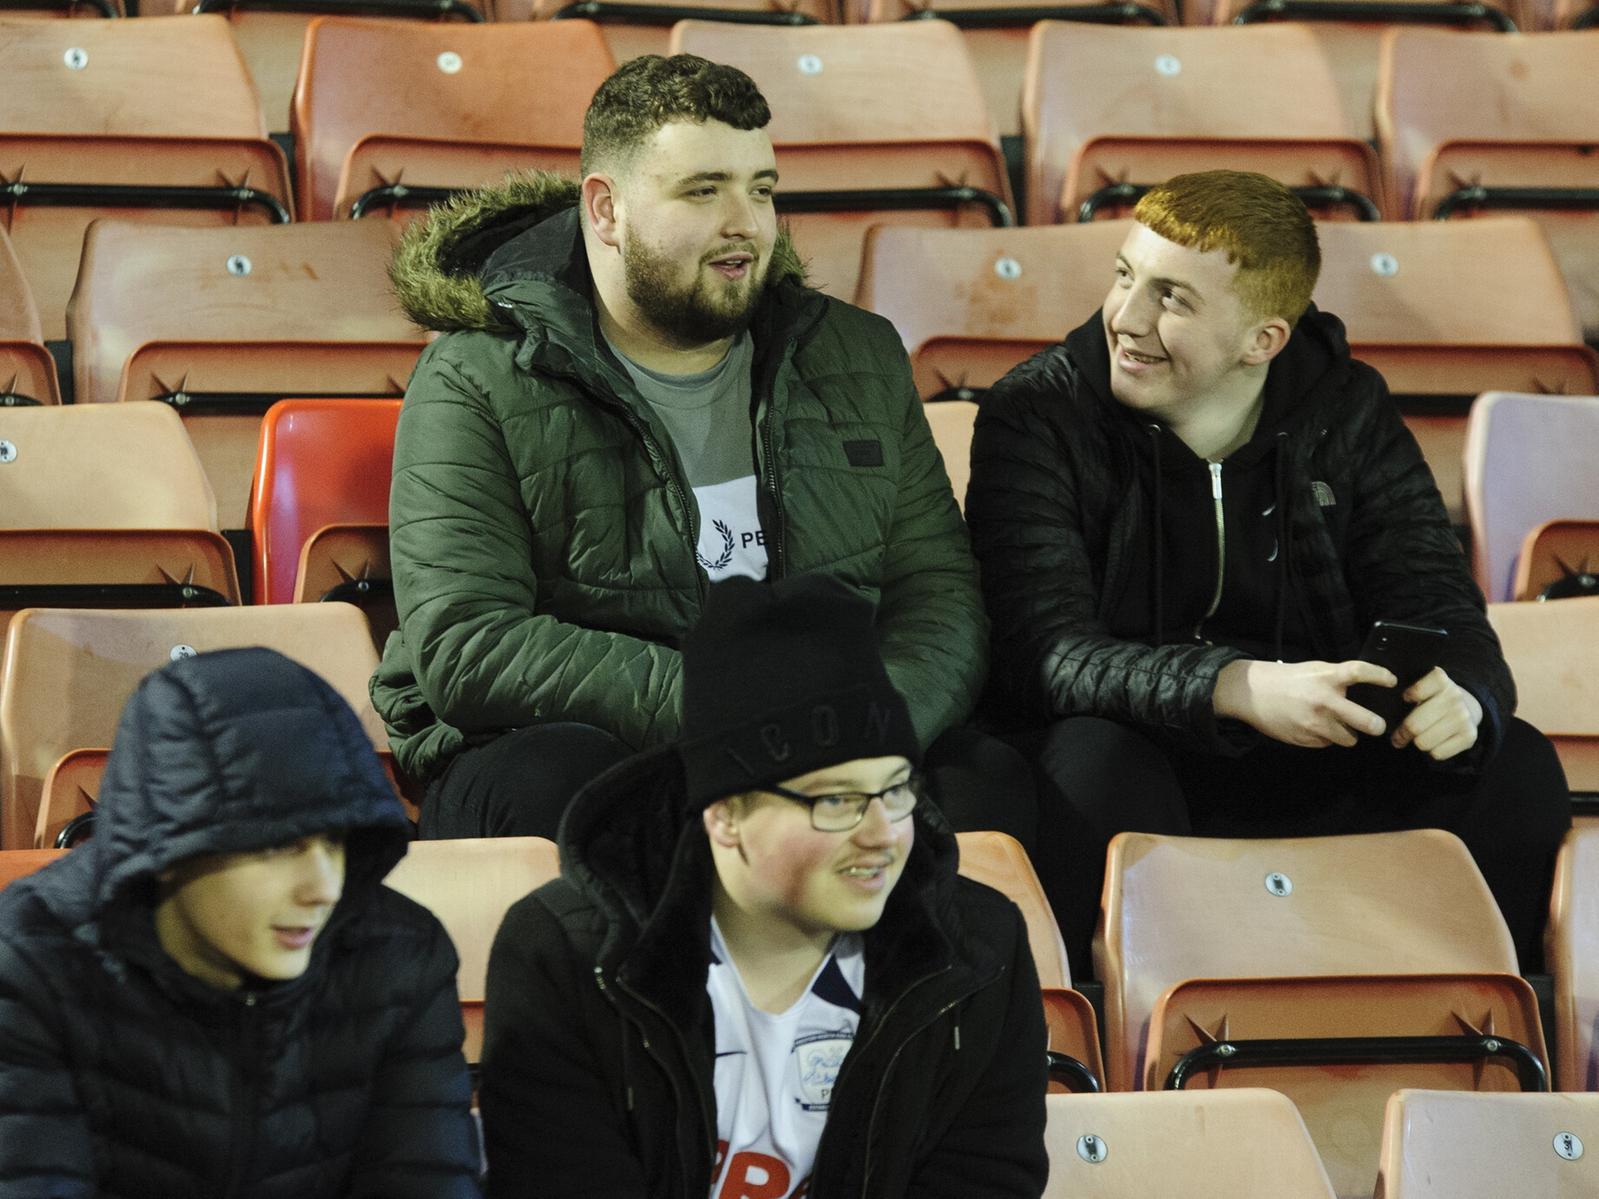 Two pairs of Preston fans have a chat in the build up to the game.